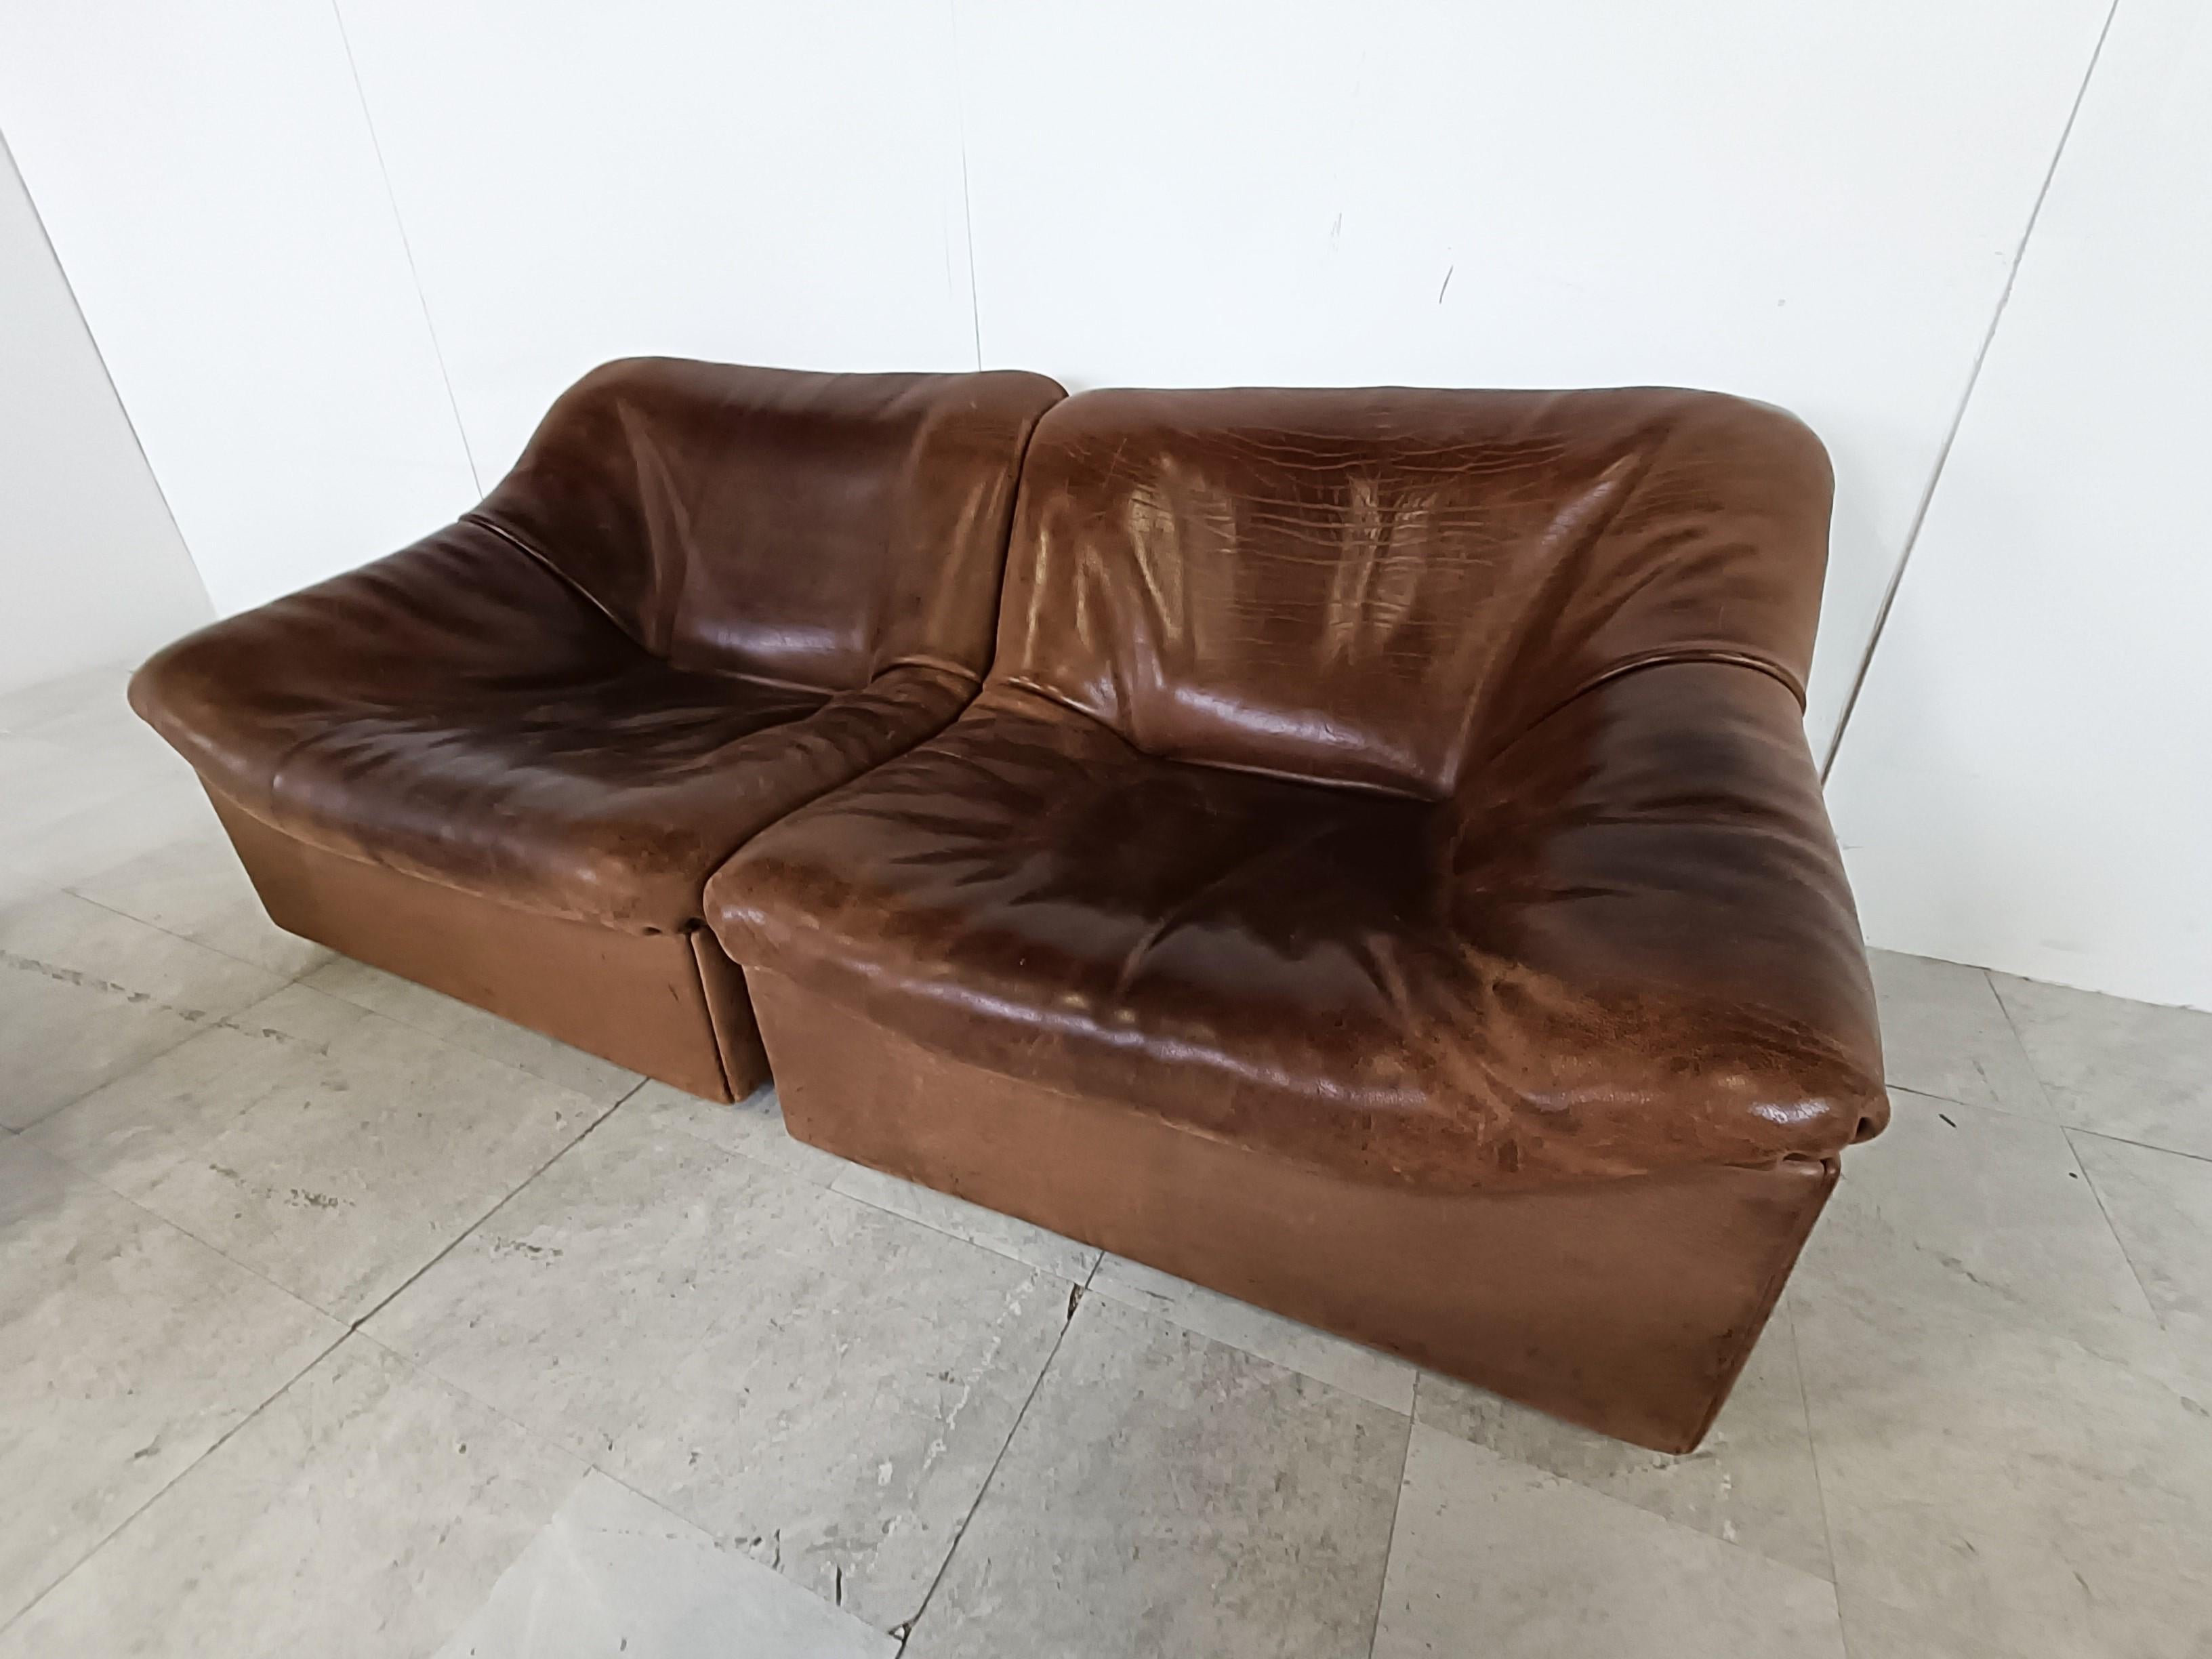 Late 20th Century Vintage Leather Ds46 Modular Sofa by De Sede, 1970s For Sale